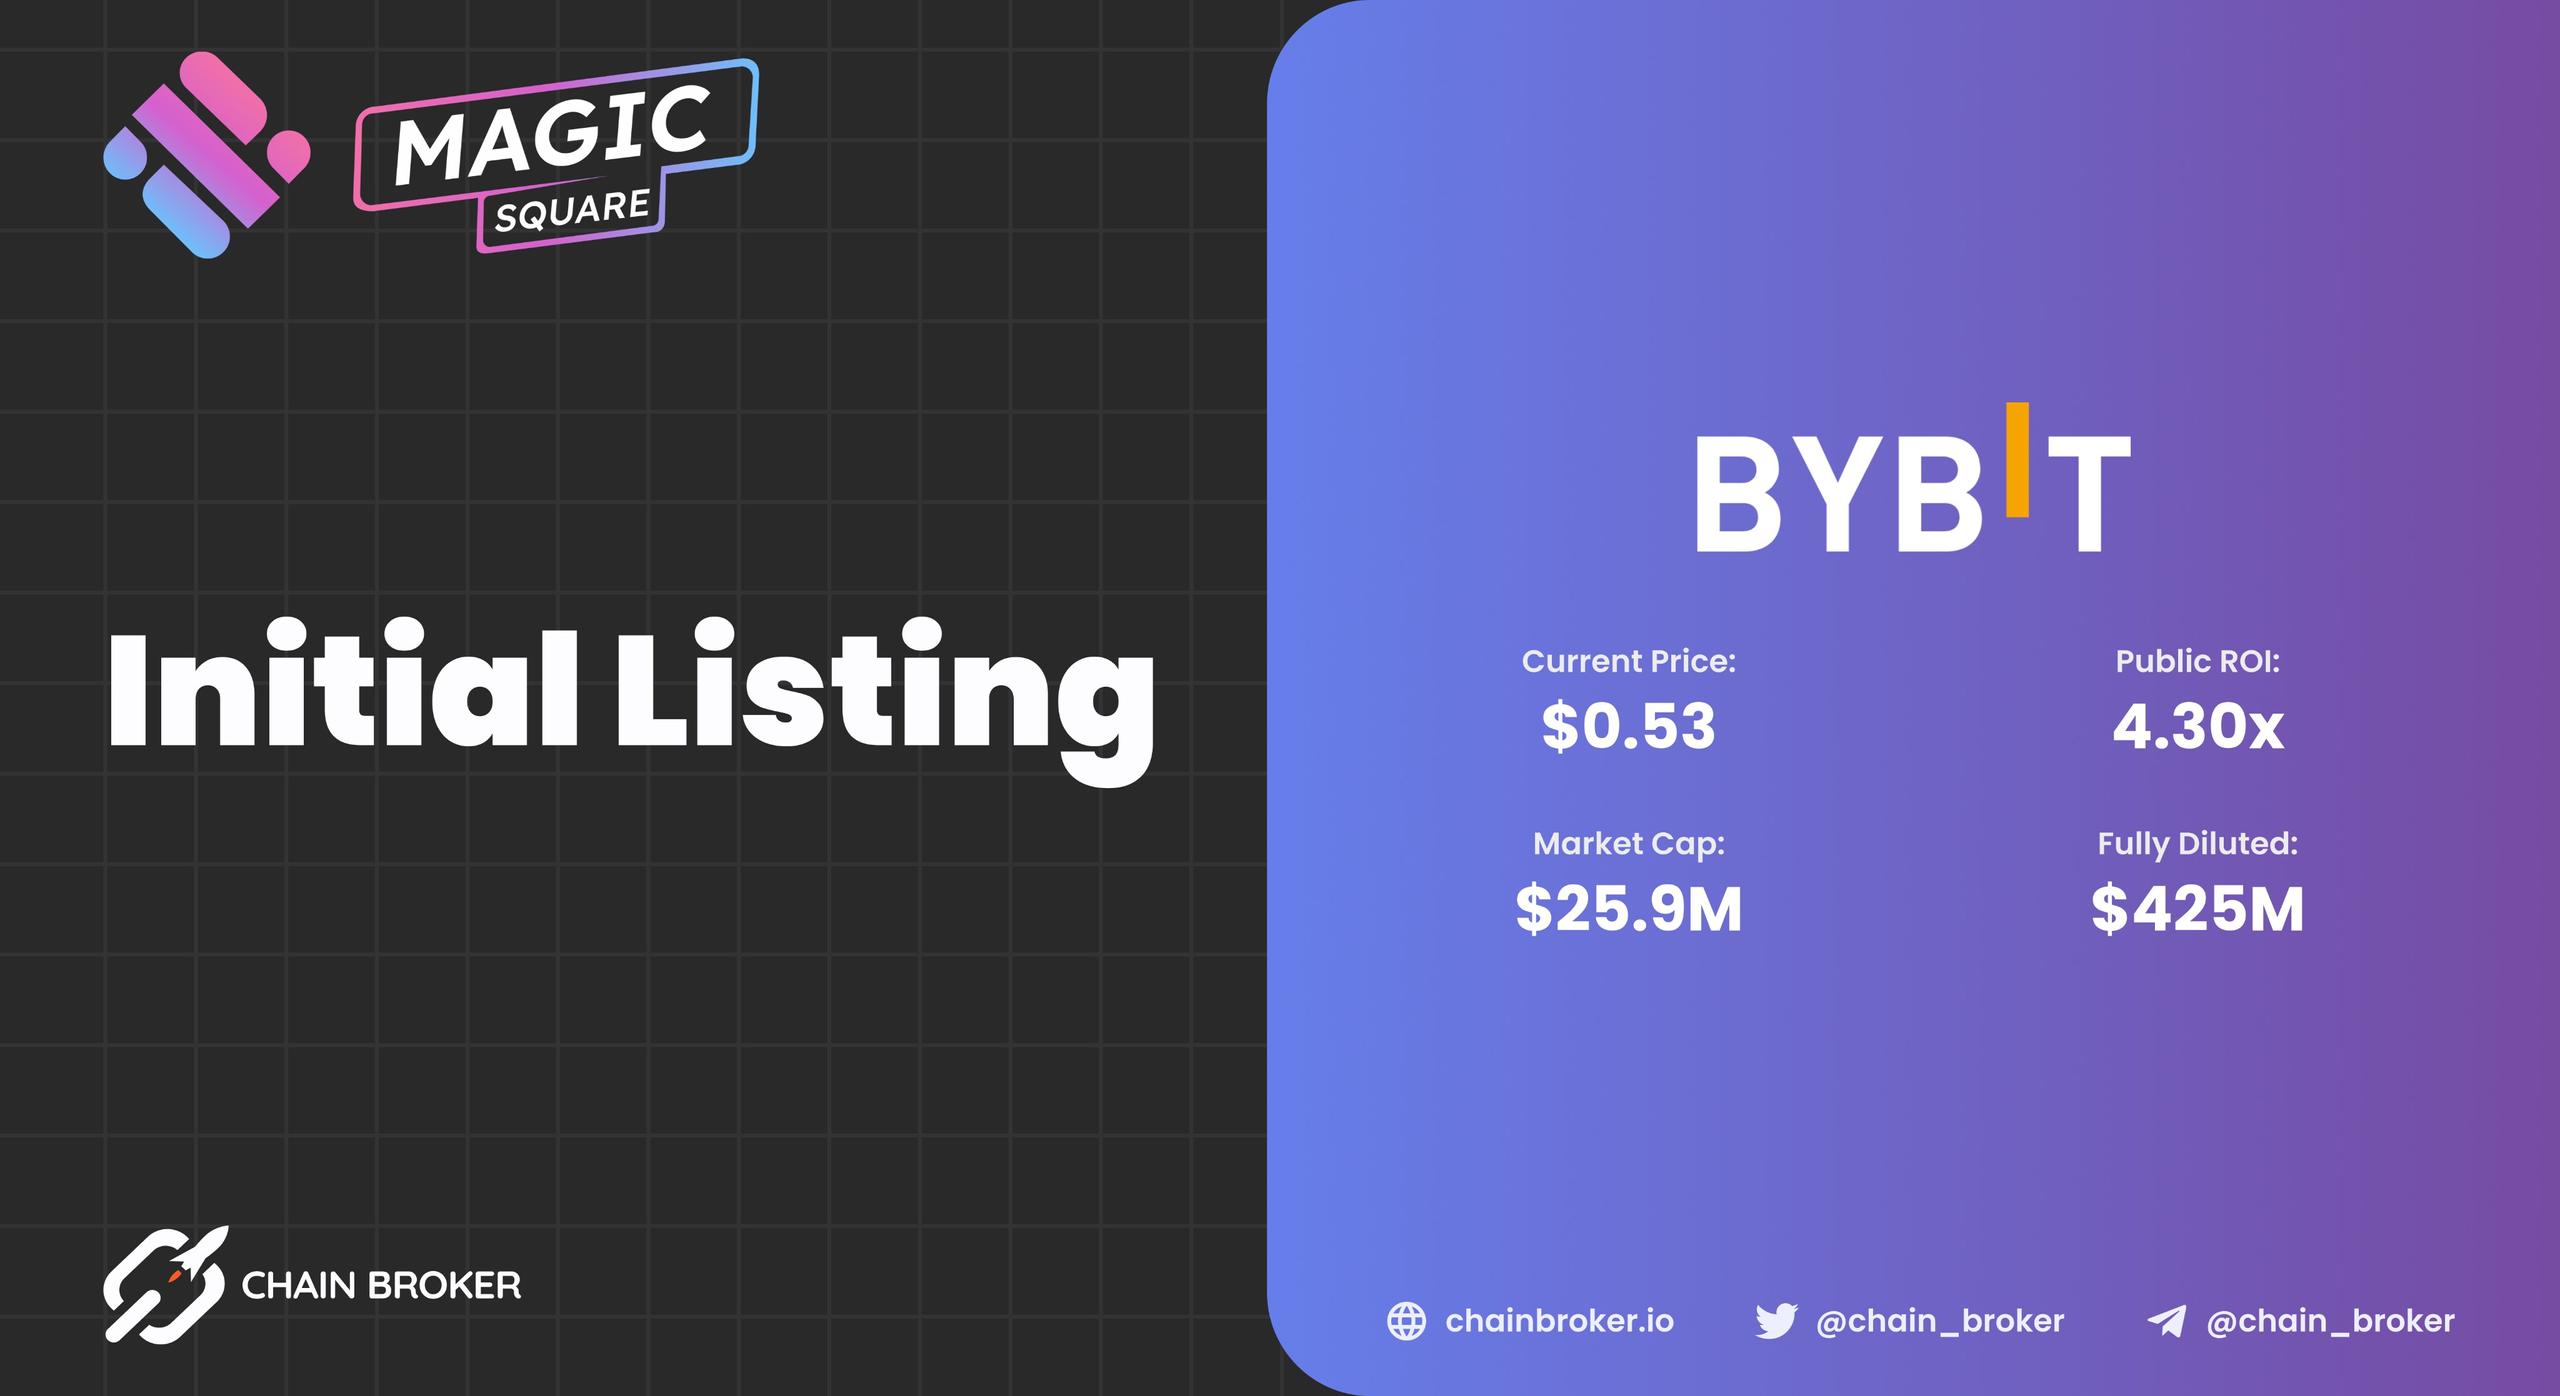 Magic Square has been Listed on Bybit